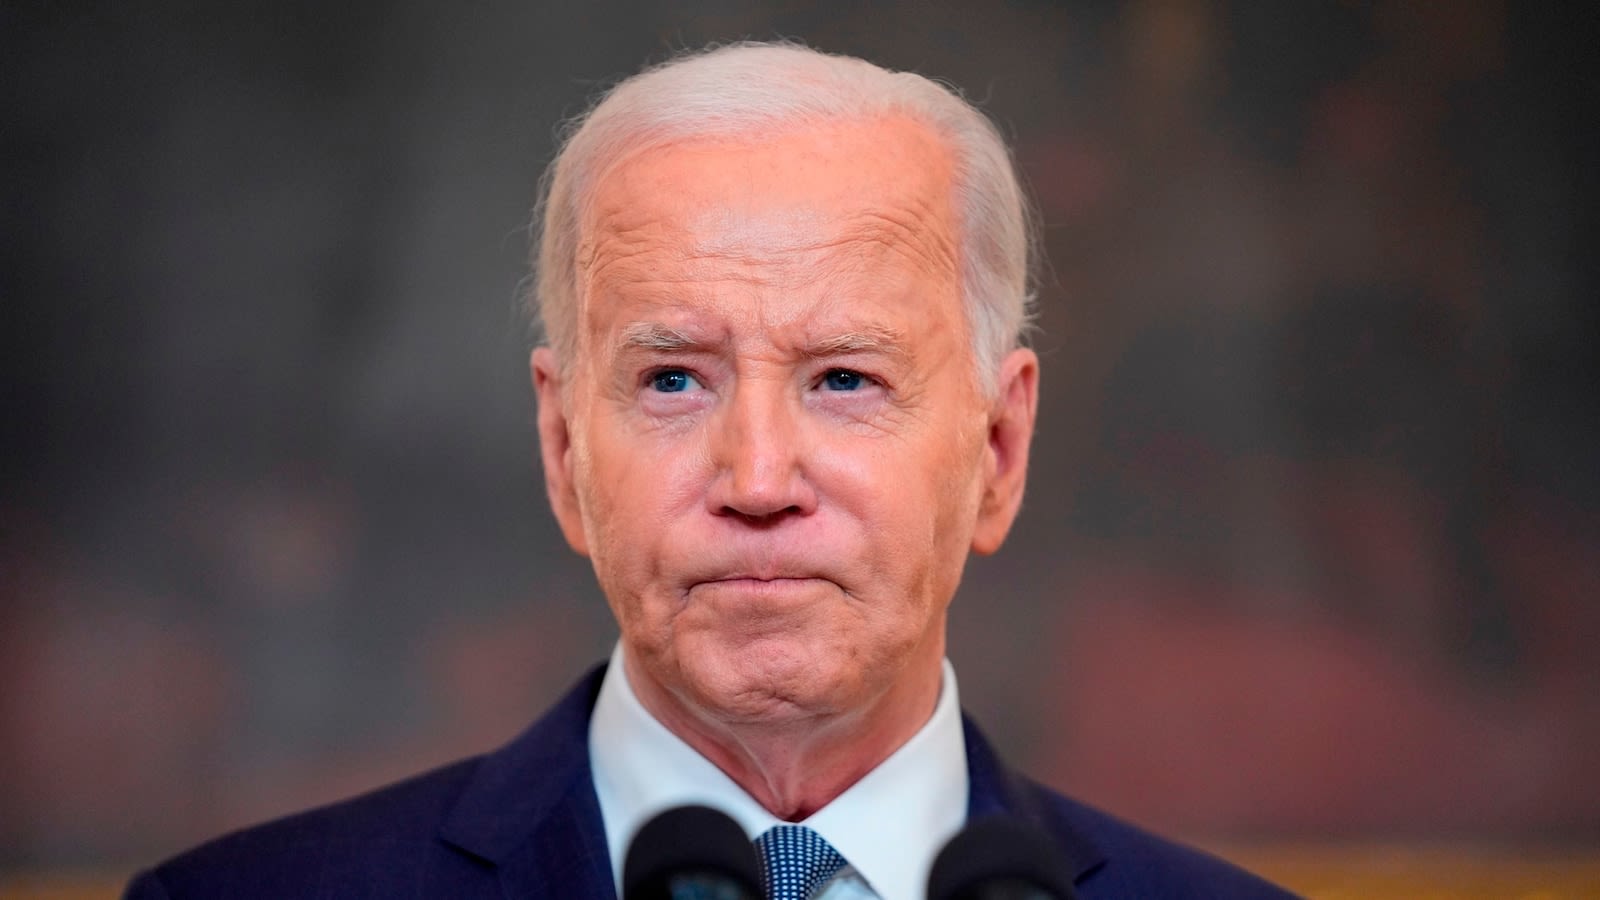 Ohio passes bill to ensure Biden appears on November ballot -- but DNC still plans to hold virtual roll call